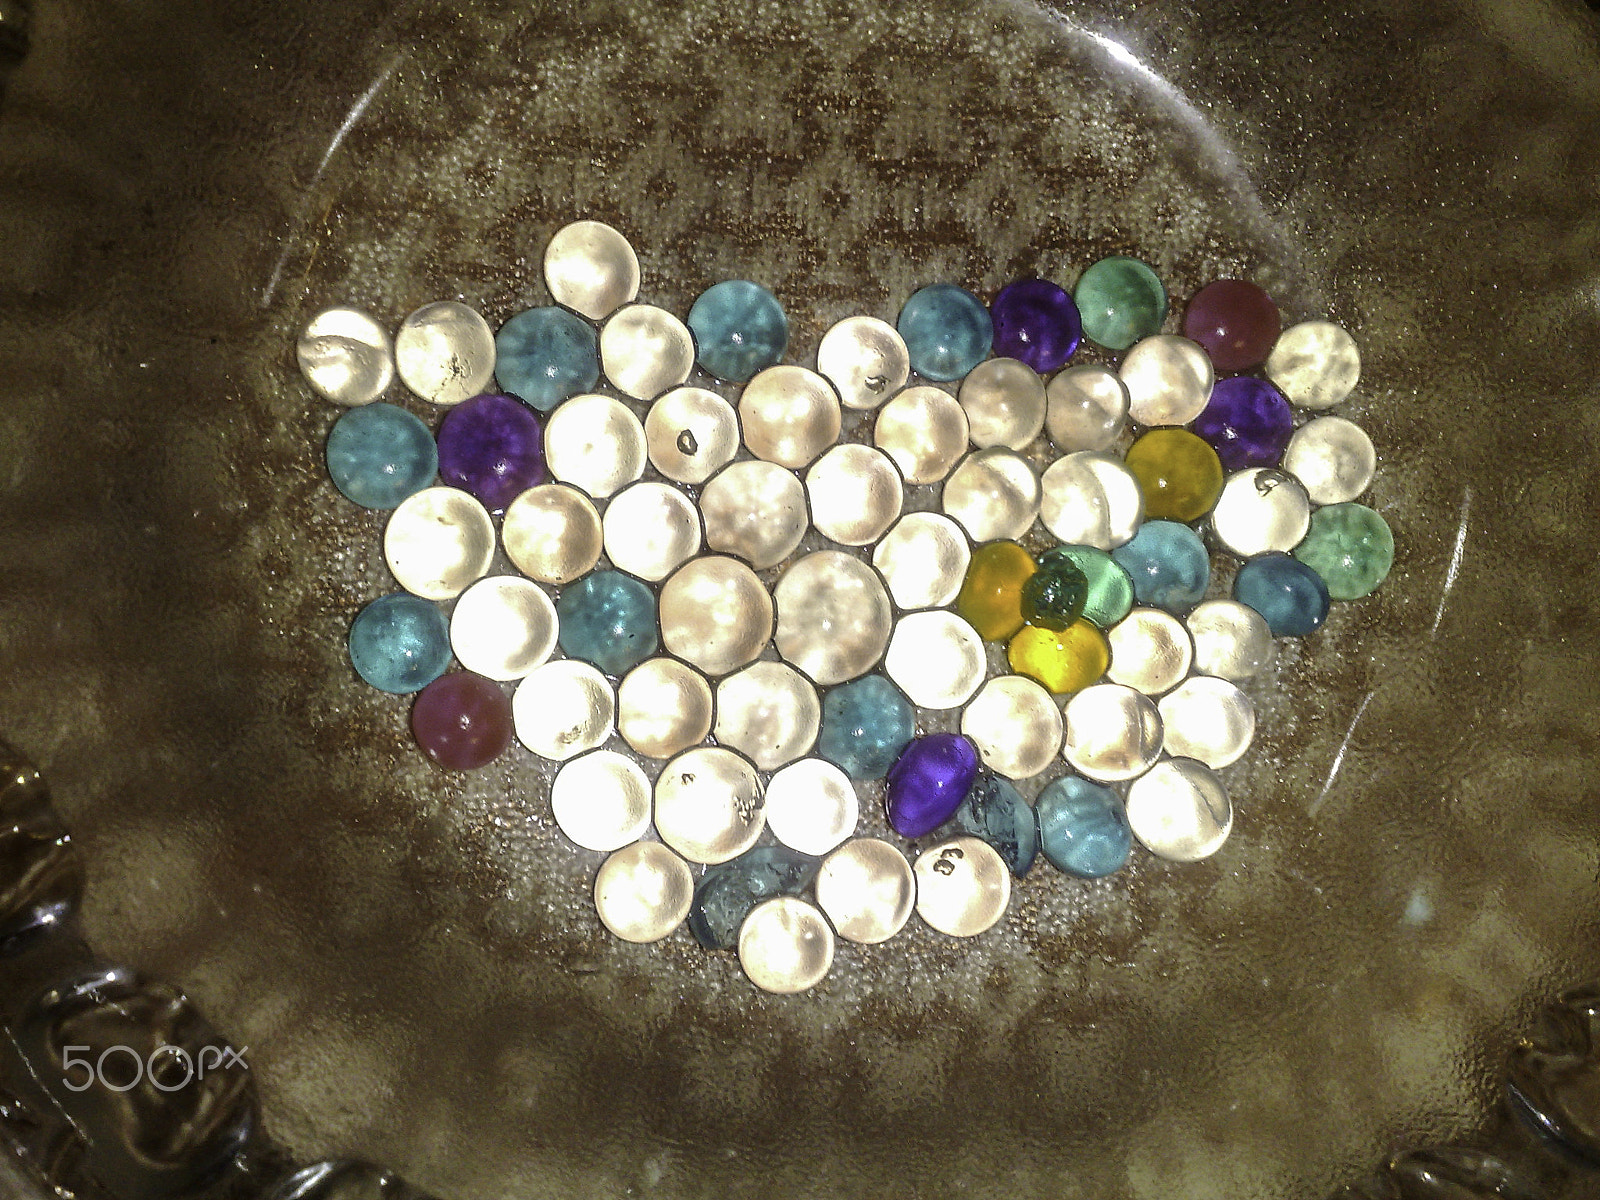 Nokia N95 8GB sample photo. Brightly colored silica gel balls reflecting the camera flash photography